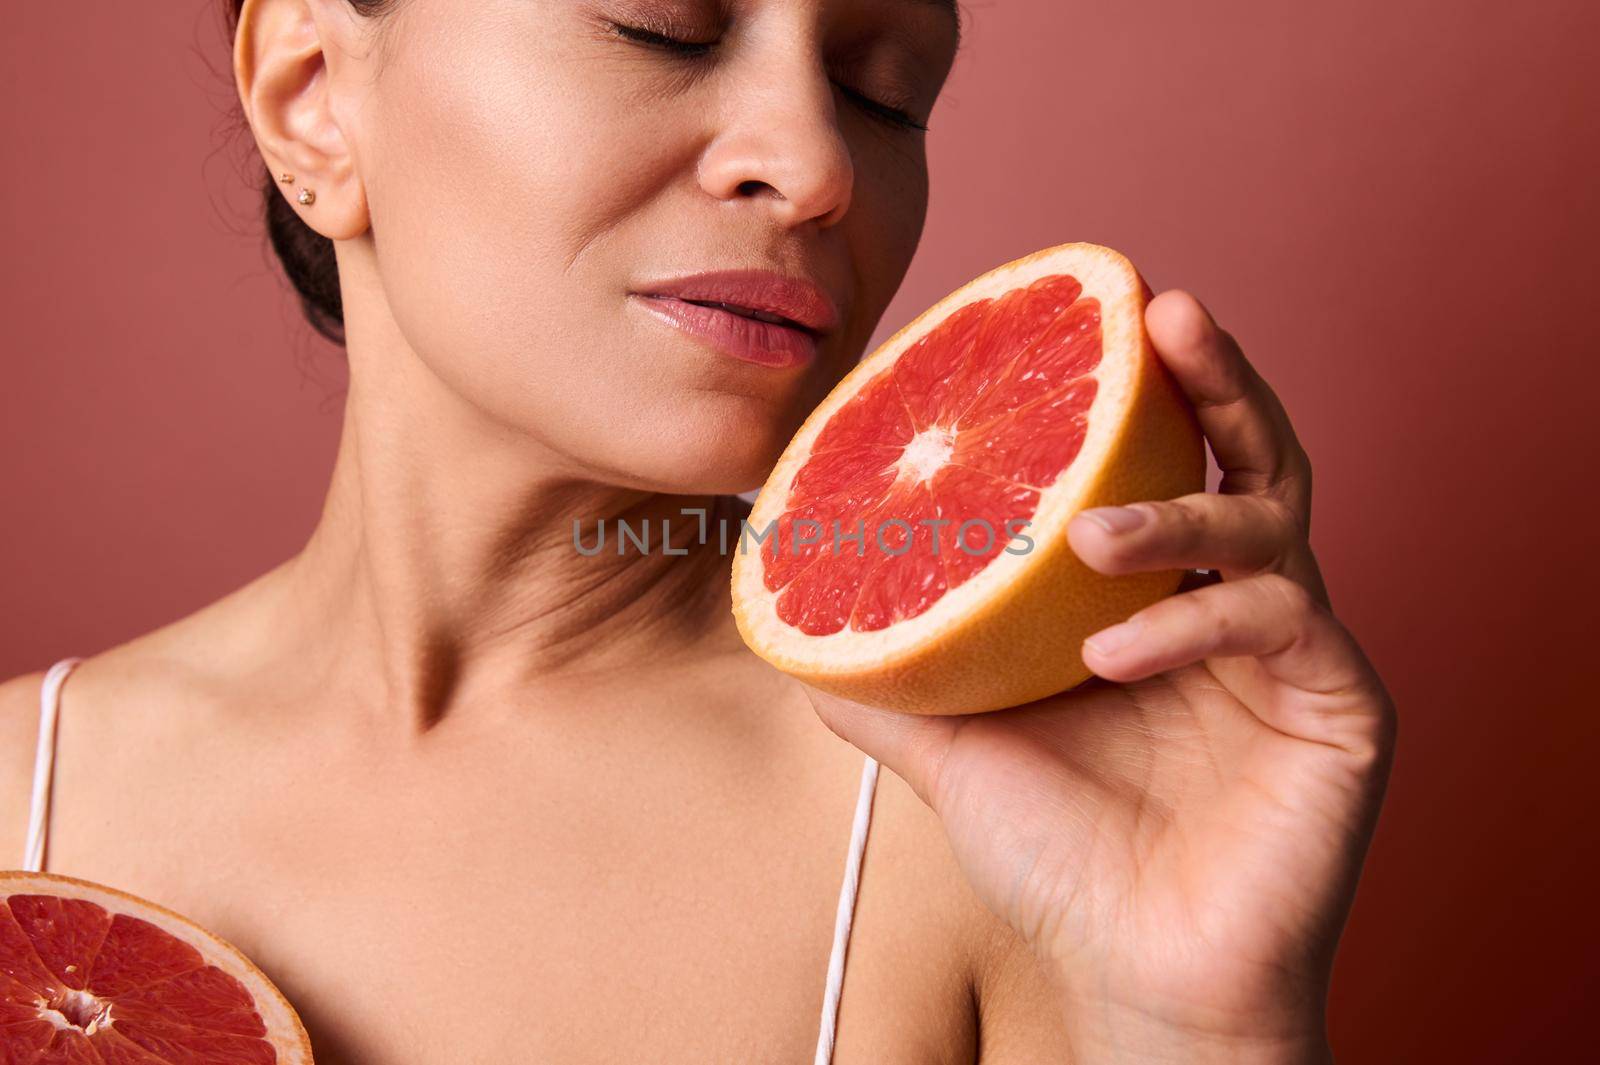 Middle aged beautiful woman with healthy glow perfect smooth skin holding grapefruit halves near her face. Natural cosmetics, skin care, wellness, beauty treatment, cosmetology concept. Close-up by artgf